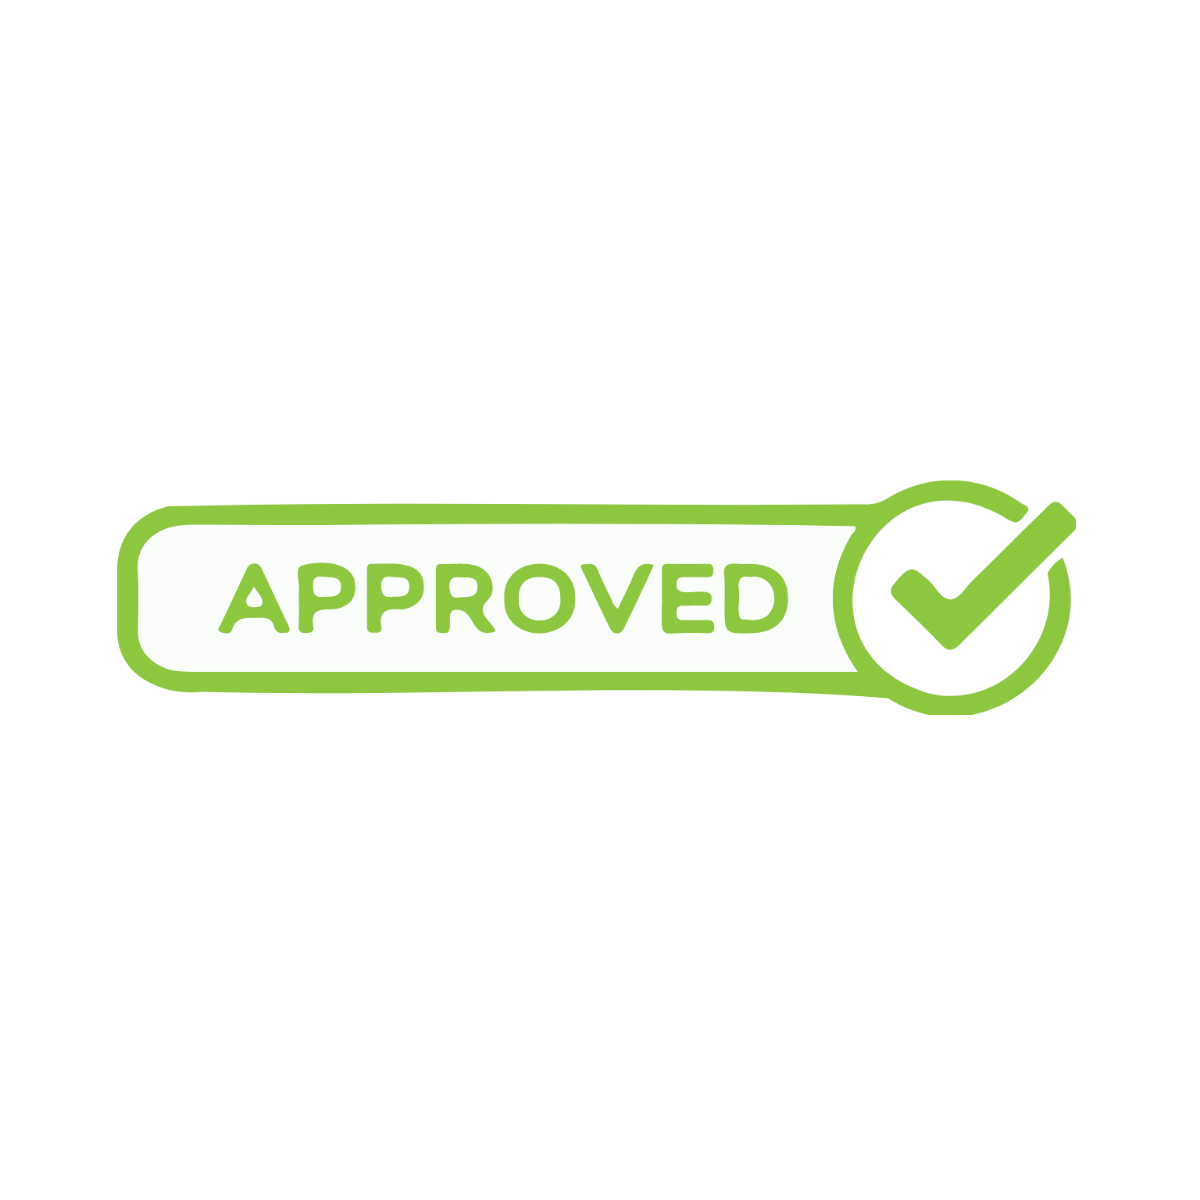 Free Tick Mark Approved clipart Template